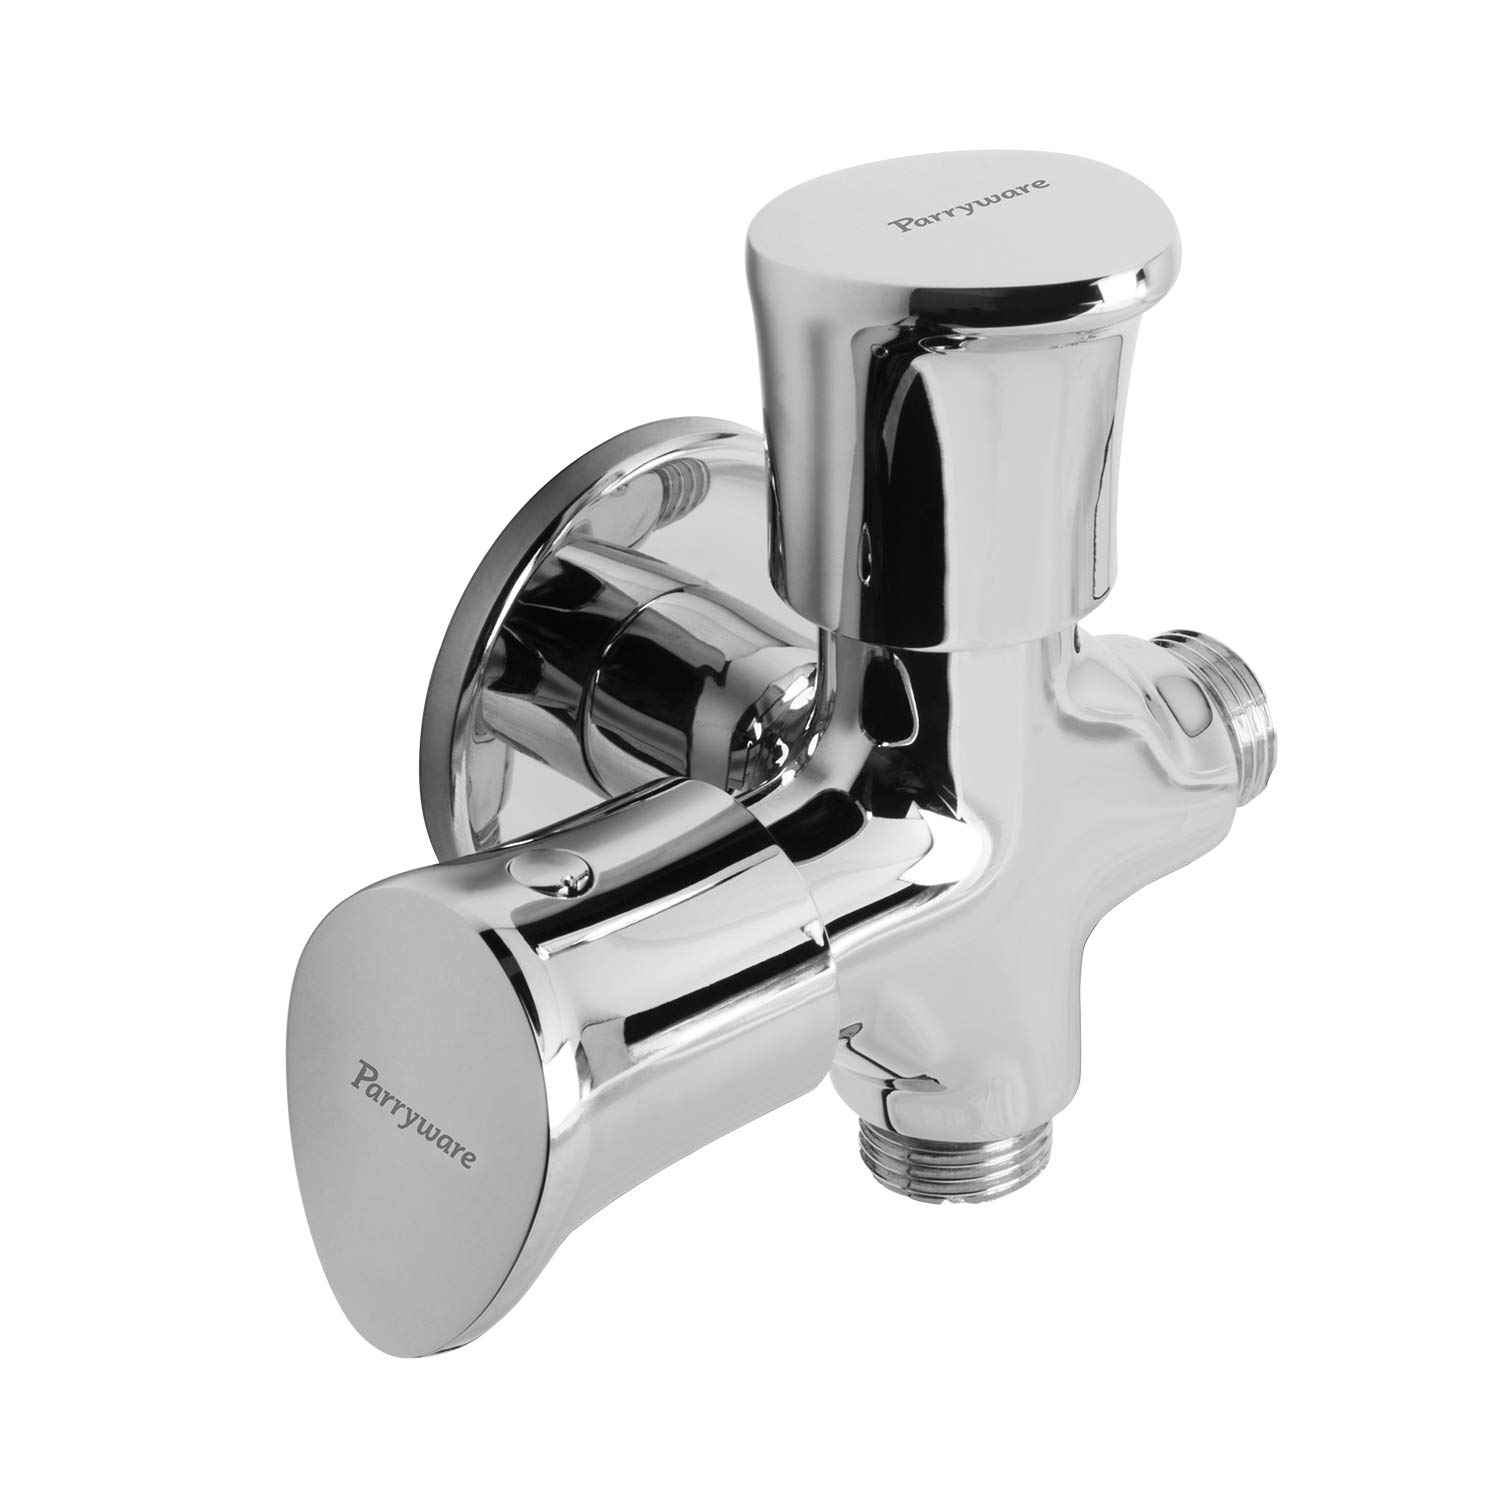 Parryware Droplet Two Way Angle Valve G471YA1 (Quarter Turn Range with Ceramic Innerhead)